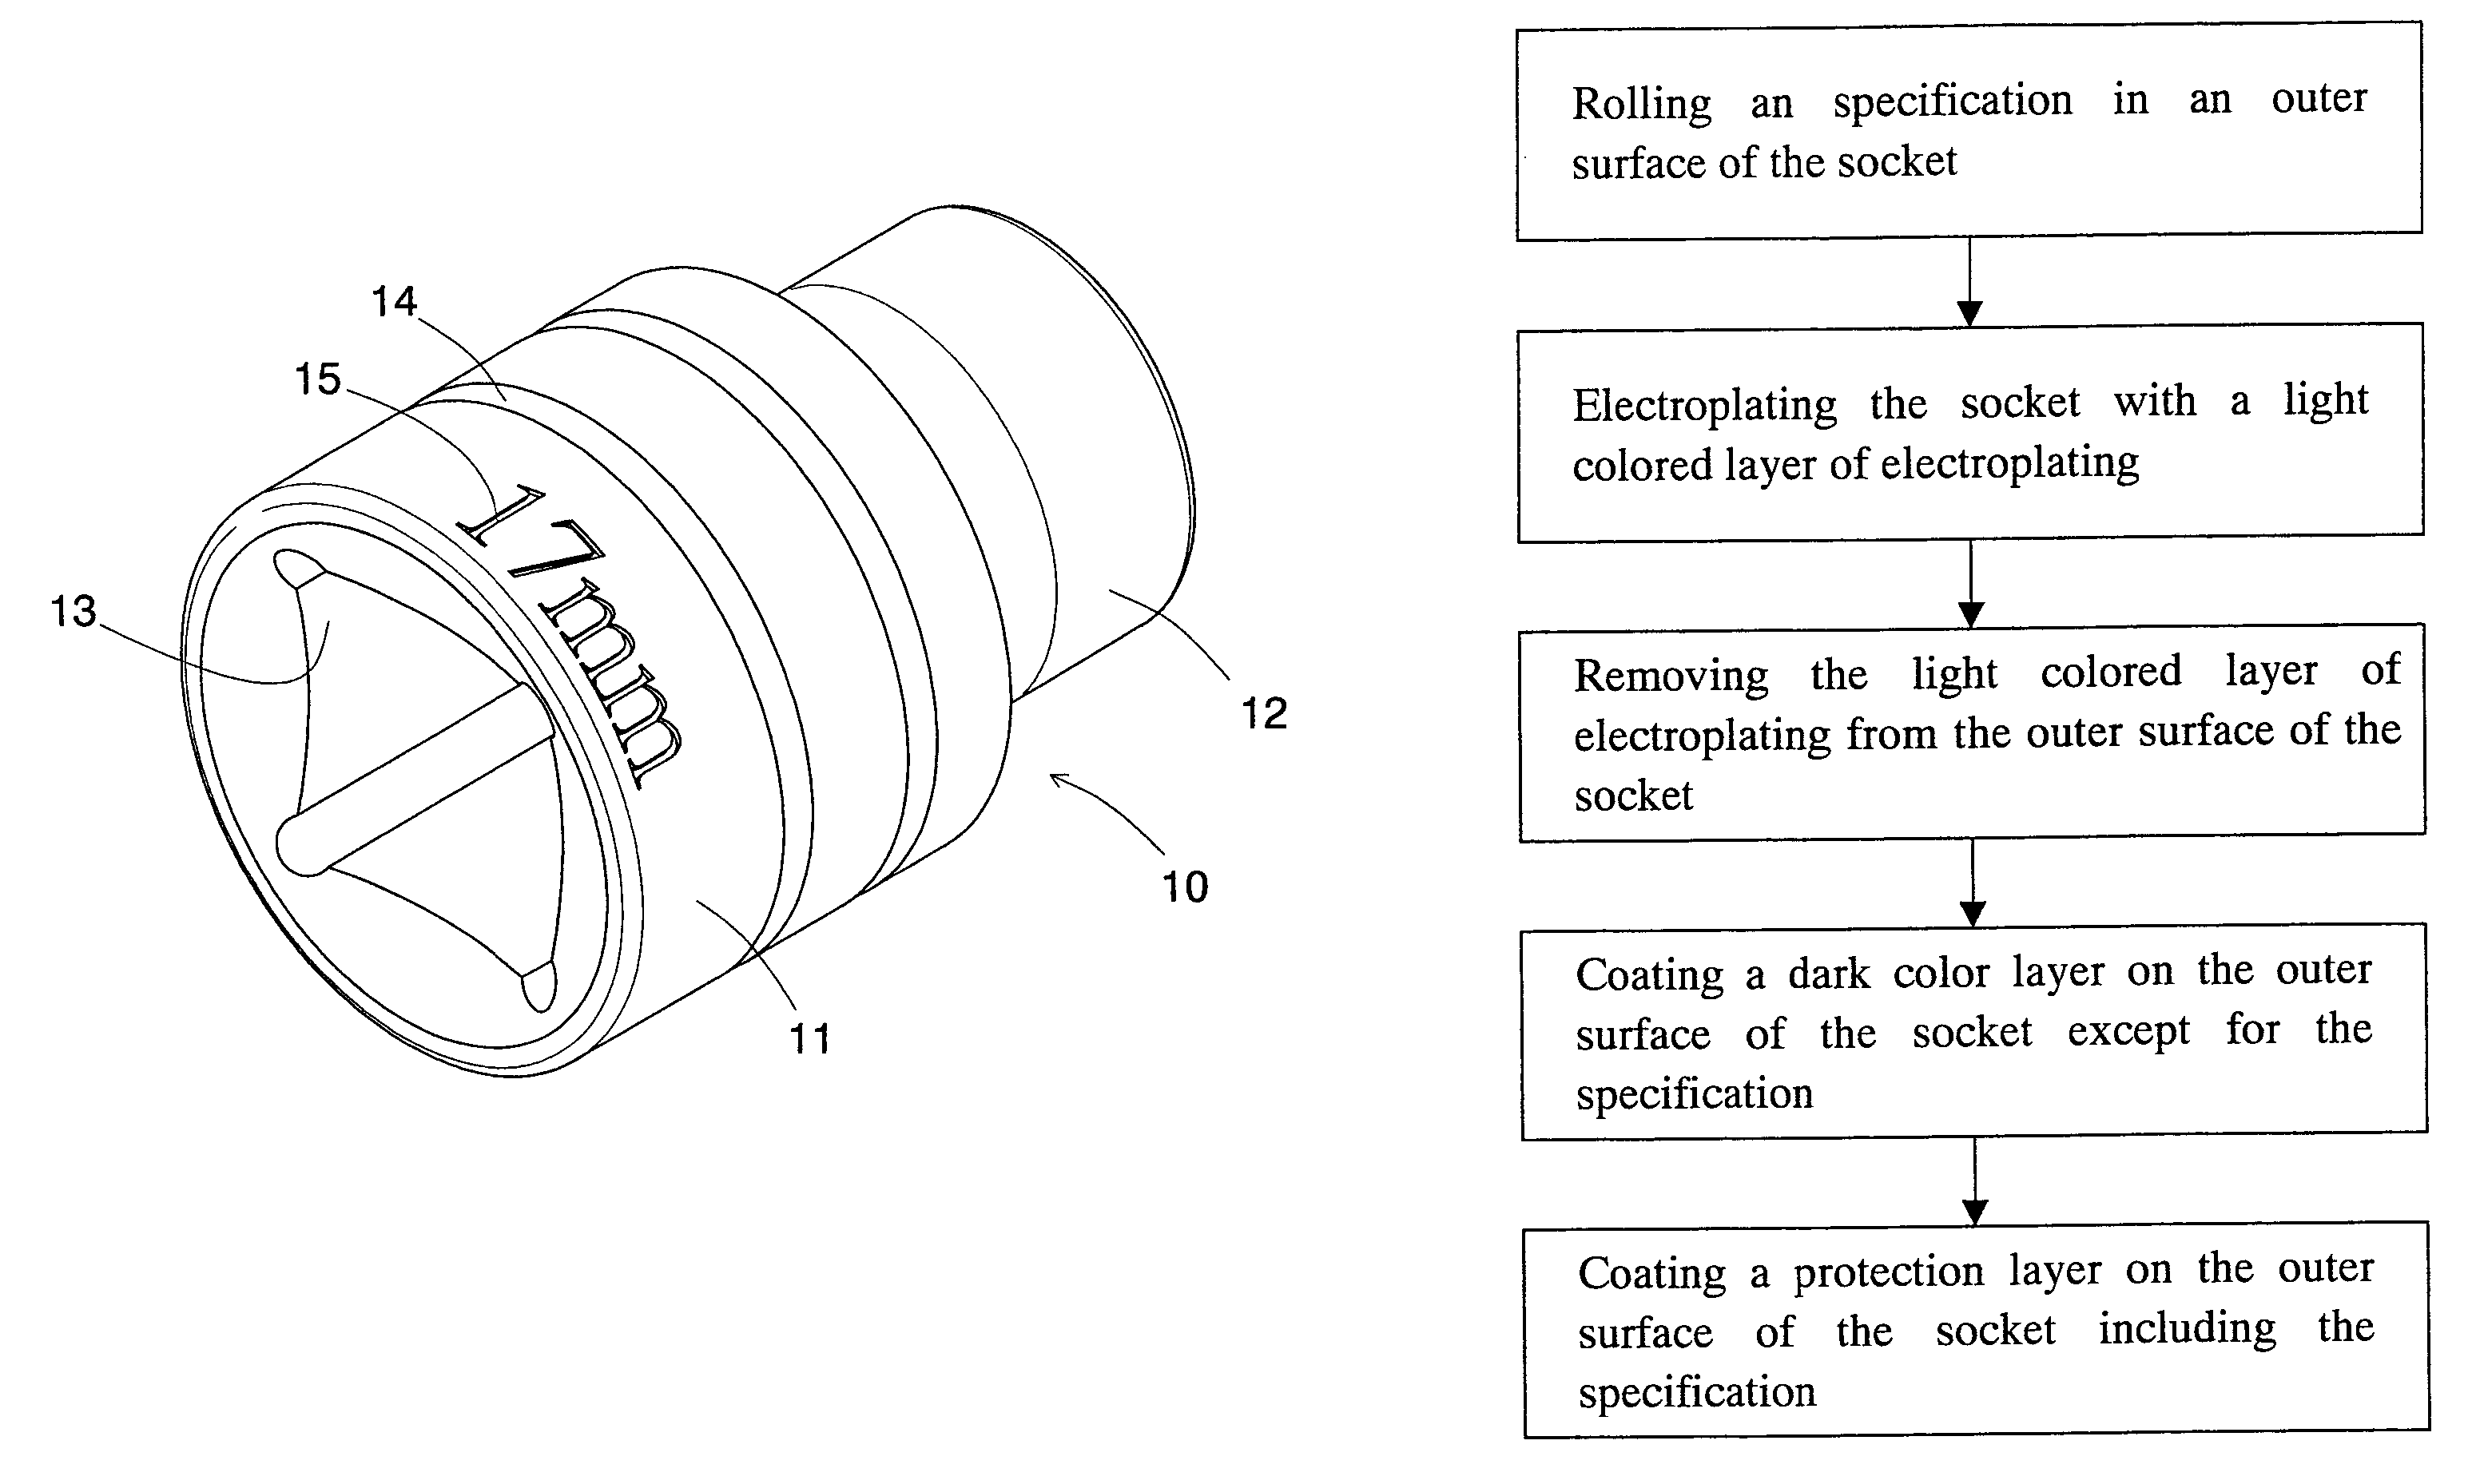 Sockets and method of surface treatment for sockets